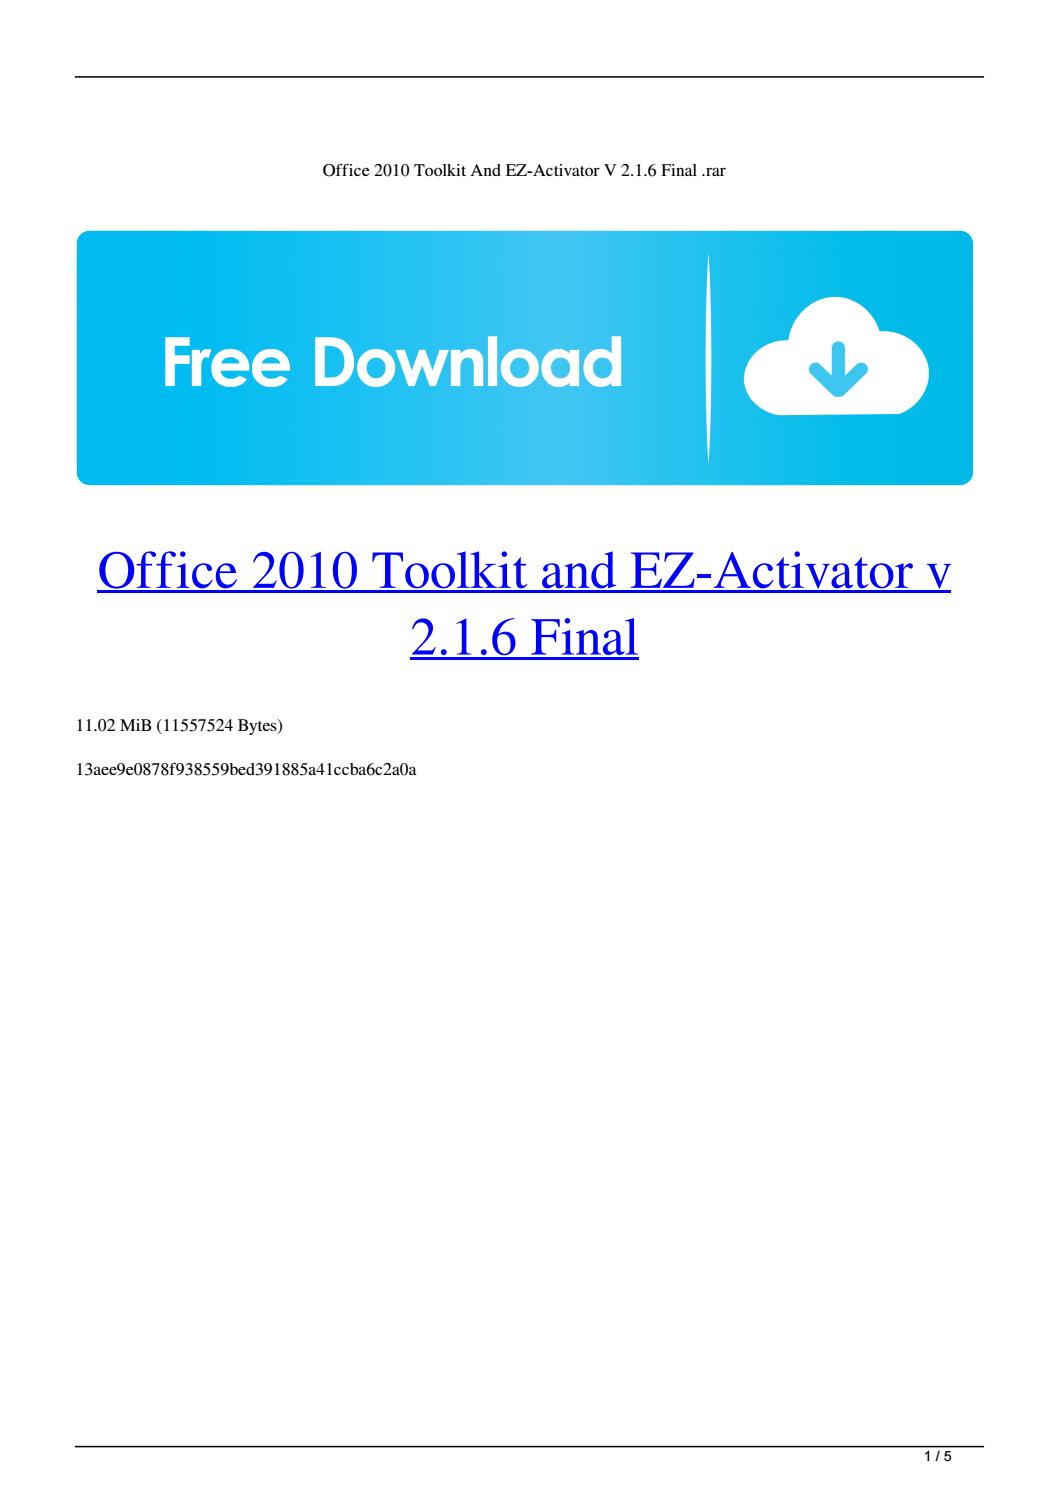 free microsoft office 2010 toolkit download